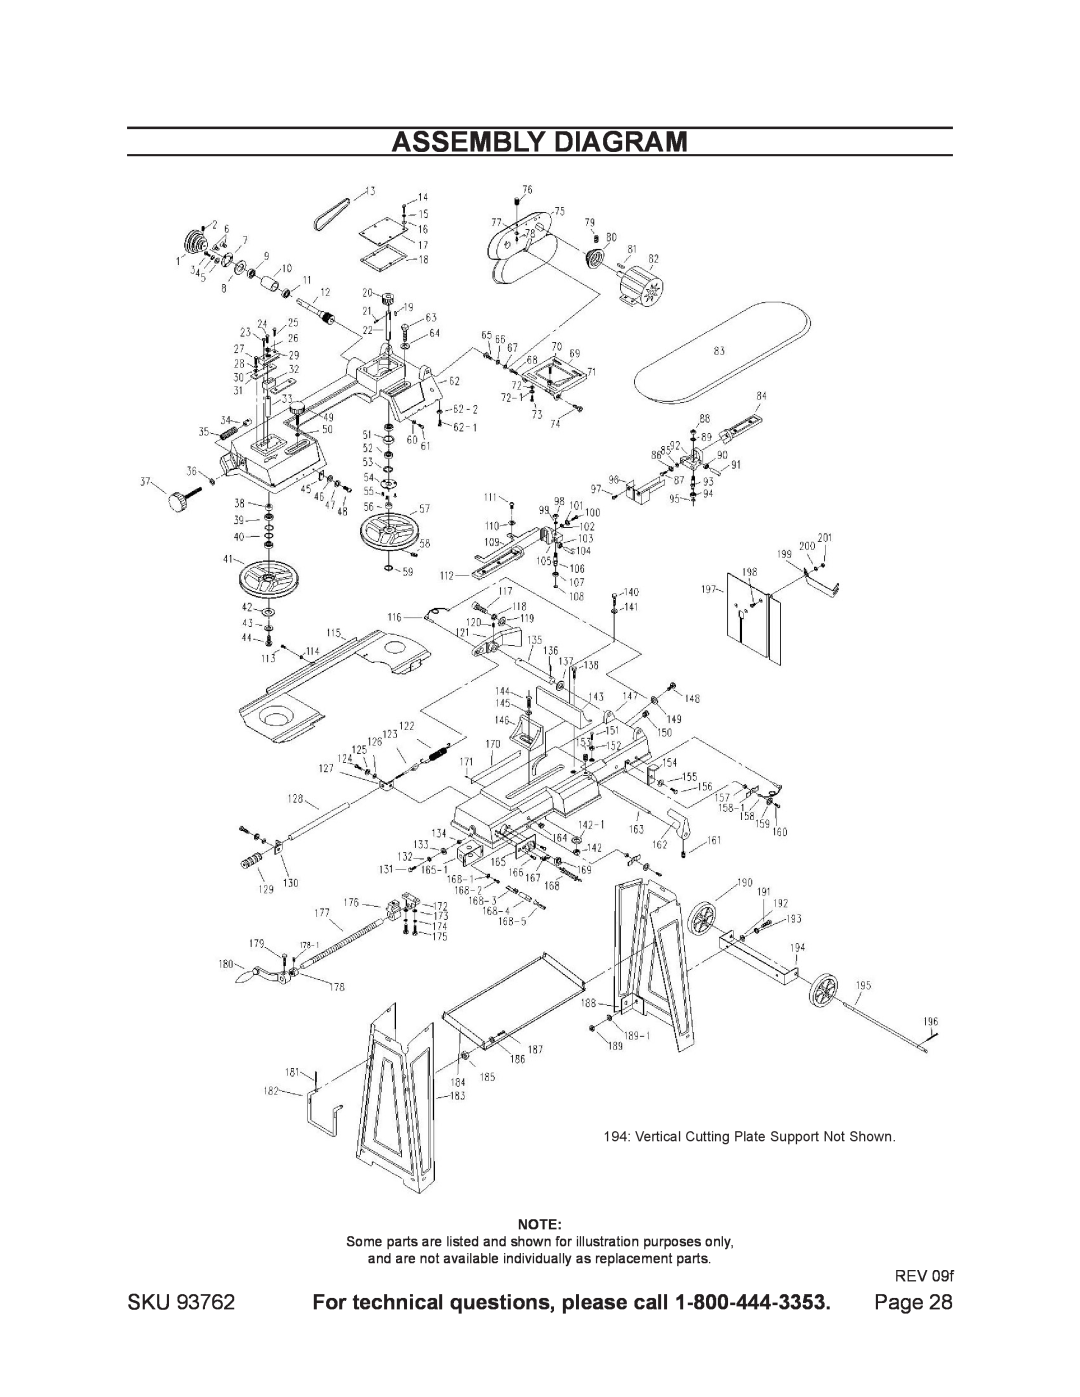 Harbor Freight Tools 93762 operating instructions Assembly Diagram, For technical questions, please call 